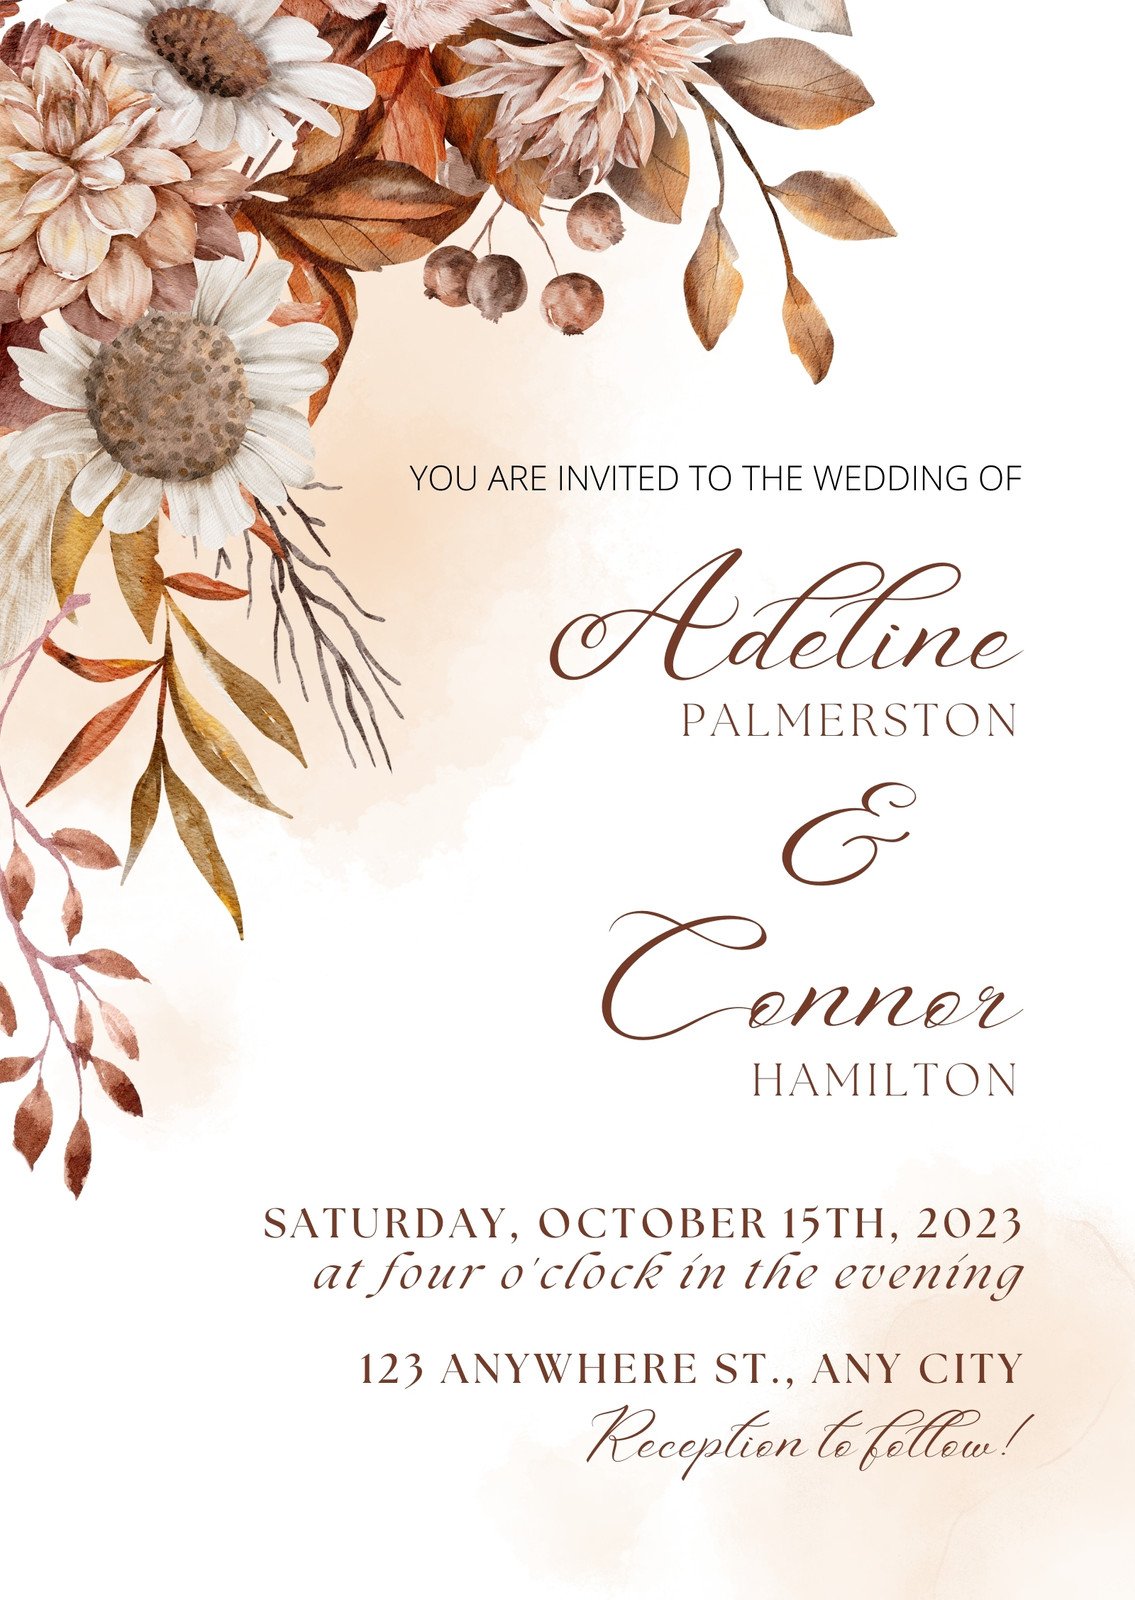 H746a  Floral Background For Wedding Invitation Transparent PNG   3246x4437  Free Download on NicePNG